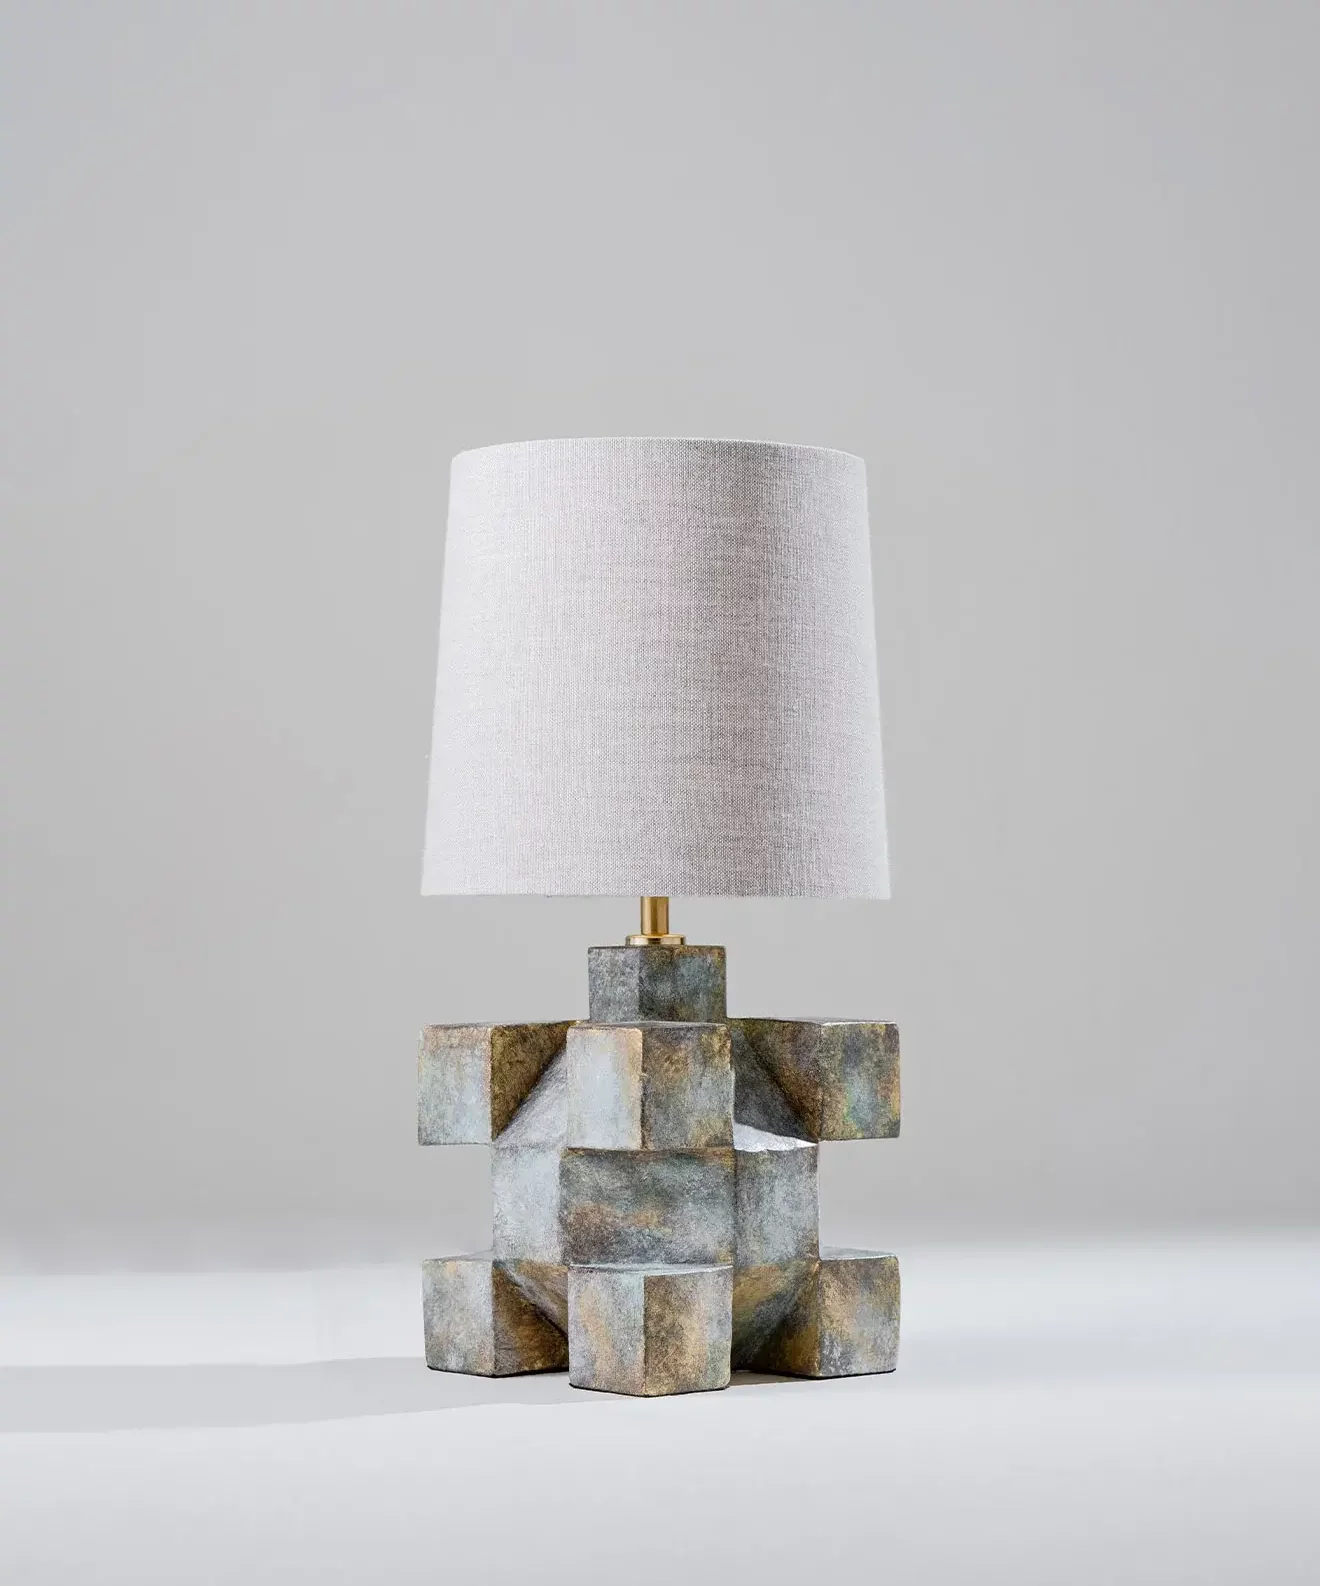 Erno table lamp